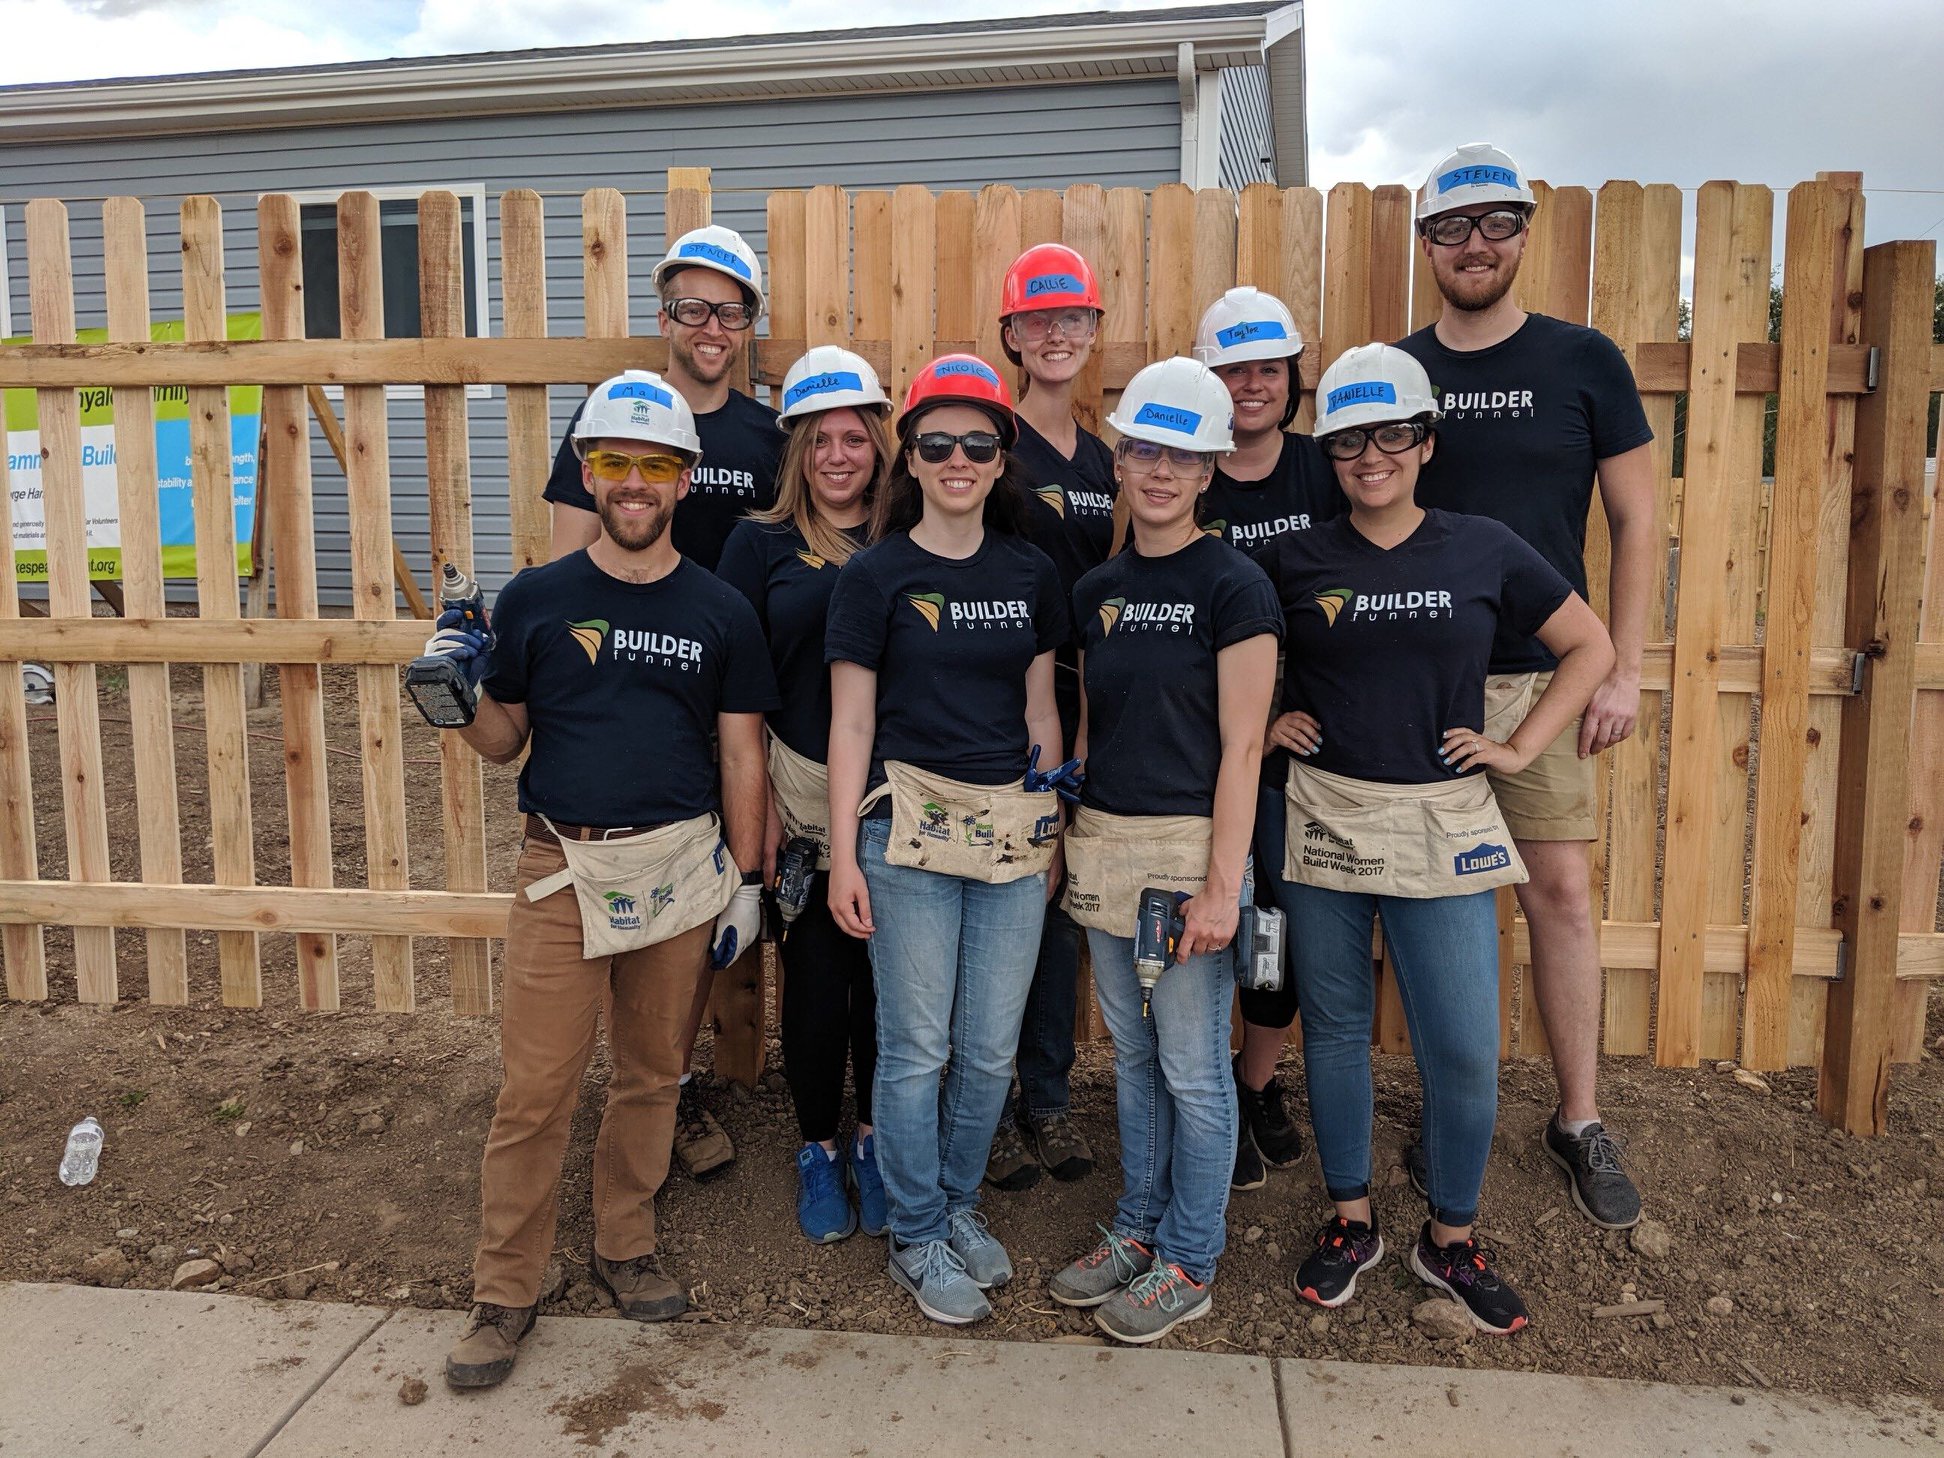 Builder Funnel Team builds a fence for Habitat for Humanity